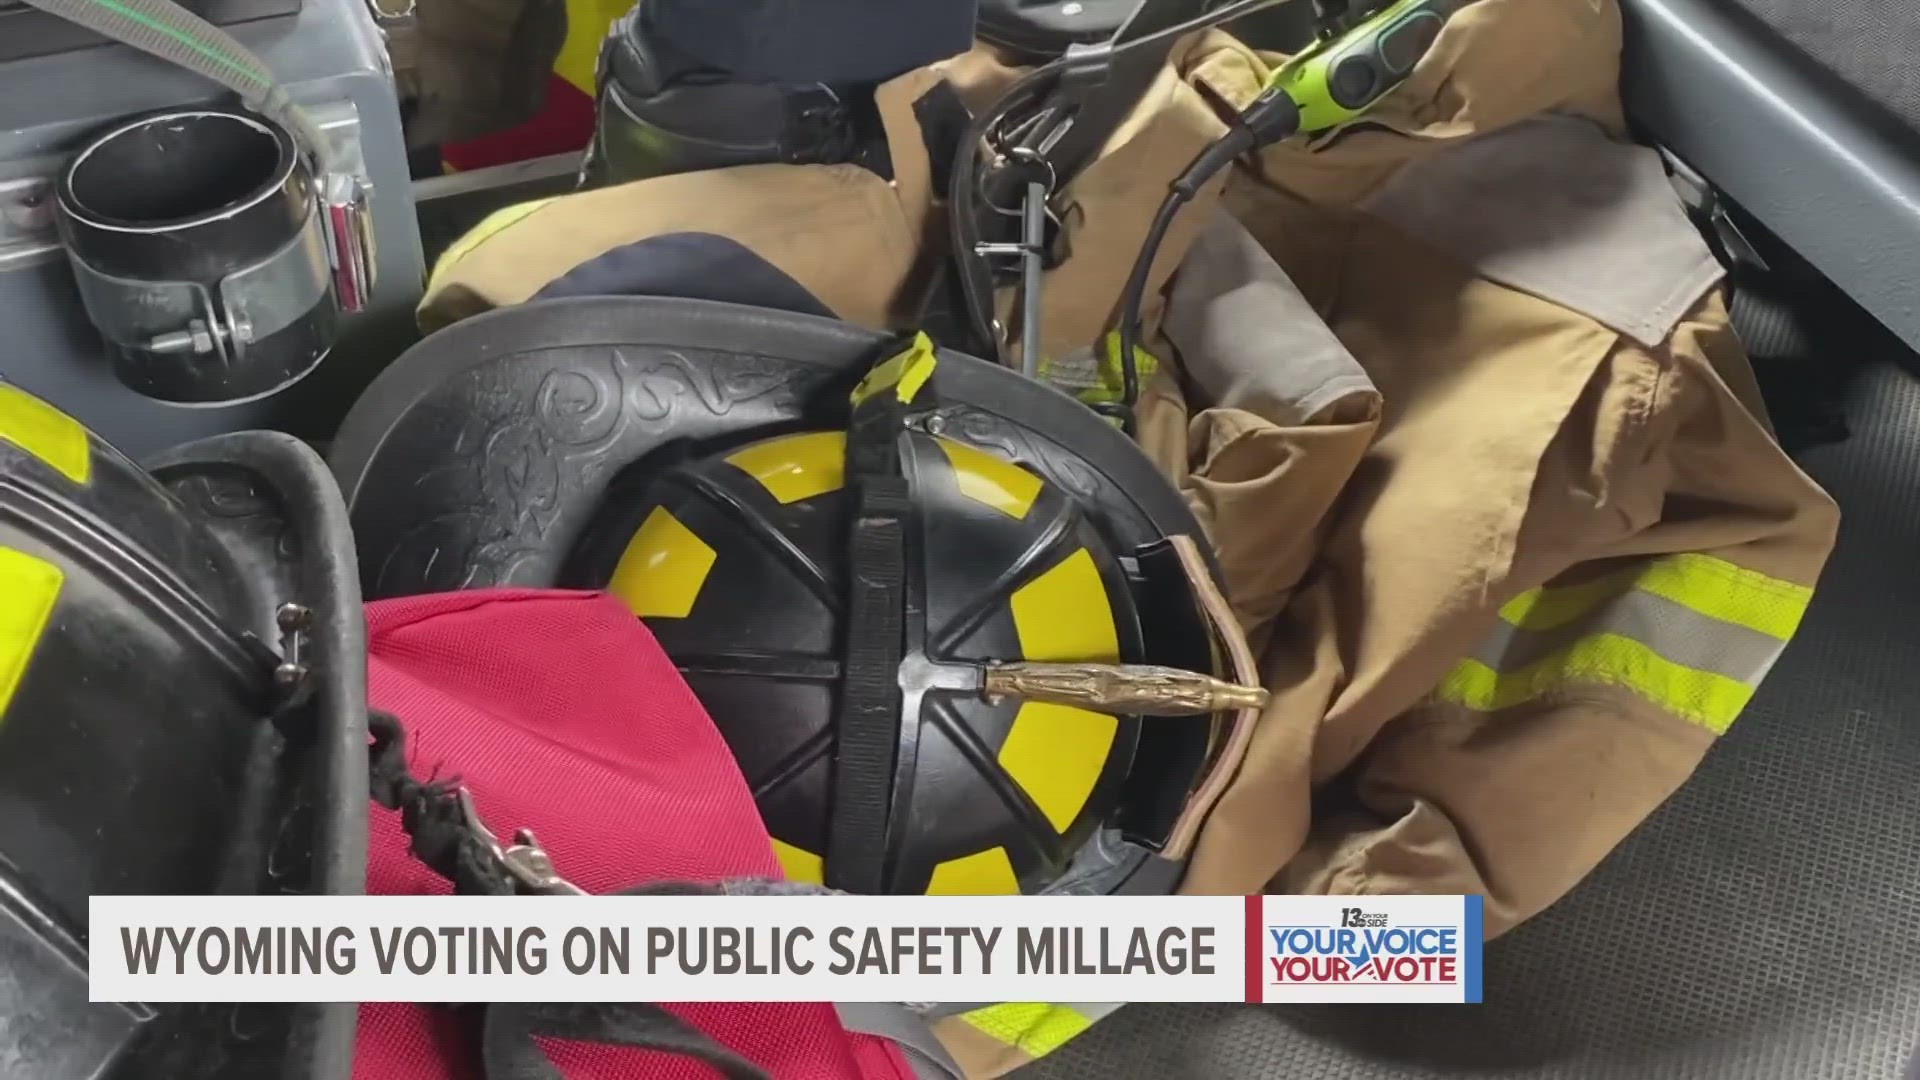 The millage will help cut down on response time during emergencies and help first responder staffing shortages, Wyoming's mayor said.